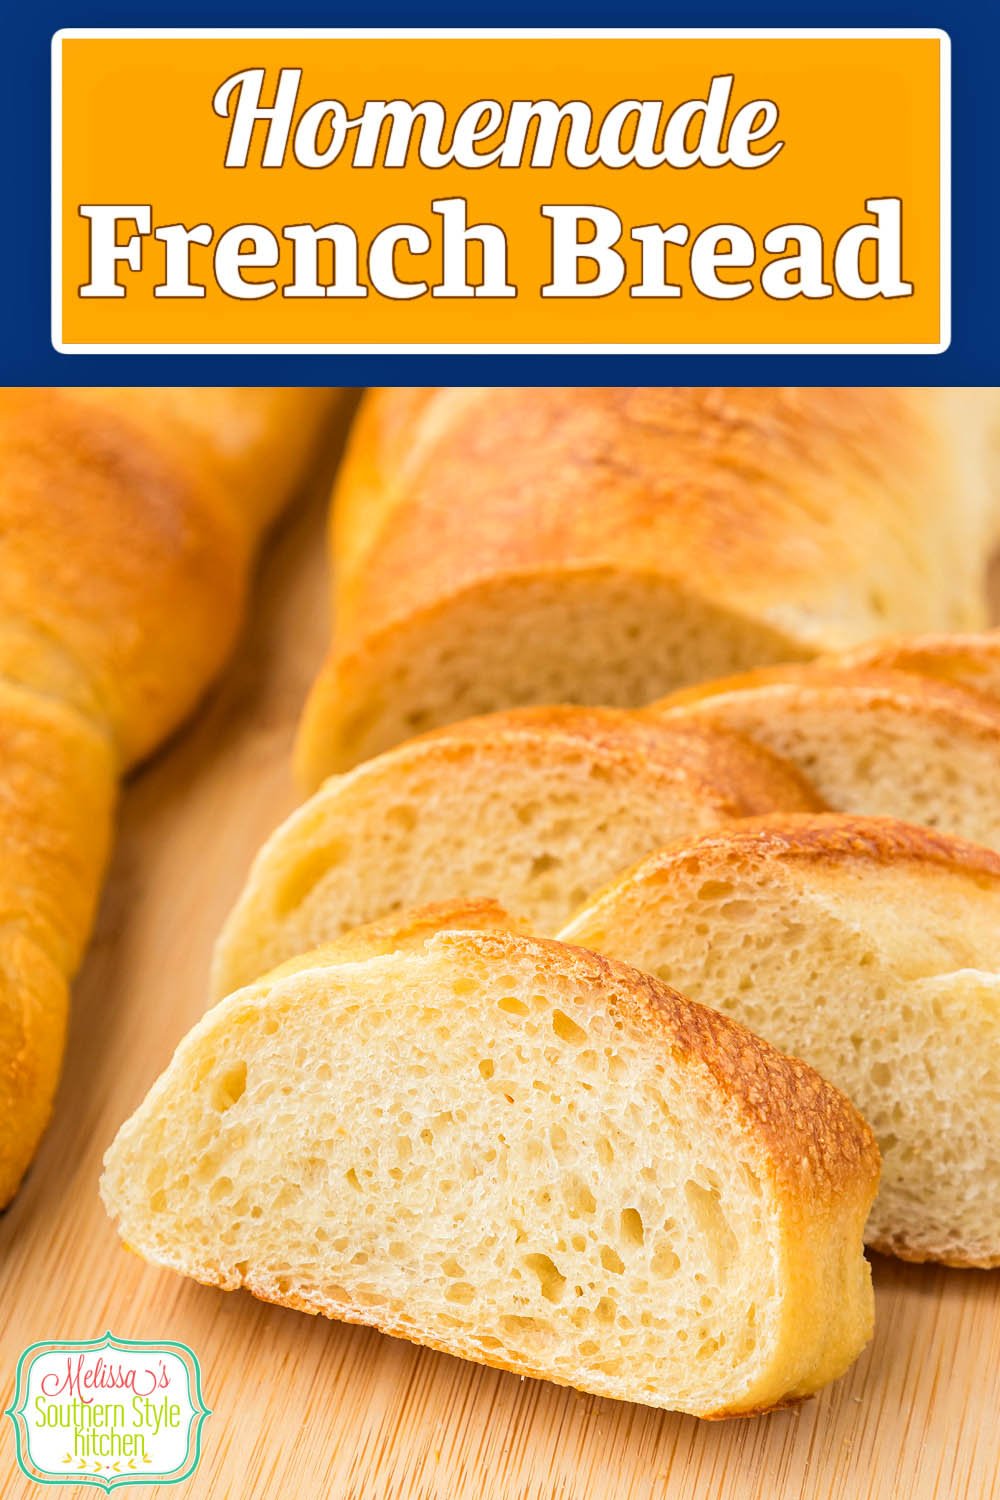 Enjoy this homemade French Bread slathered with butter as a side dish with any meal or for making hoagies, sandwiches, garlic bread and more. #frenchbread #breadrecipes #homemadebread #frenchbreadrecipe via @melissasssk